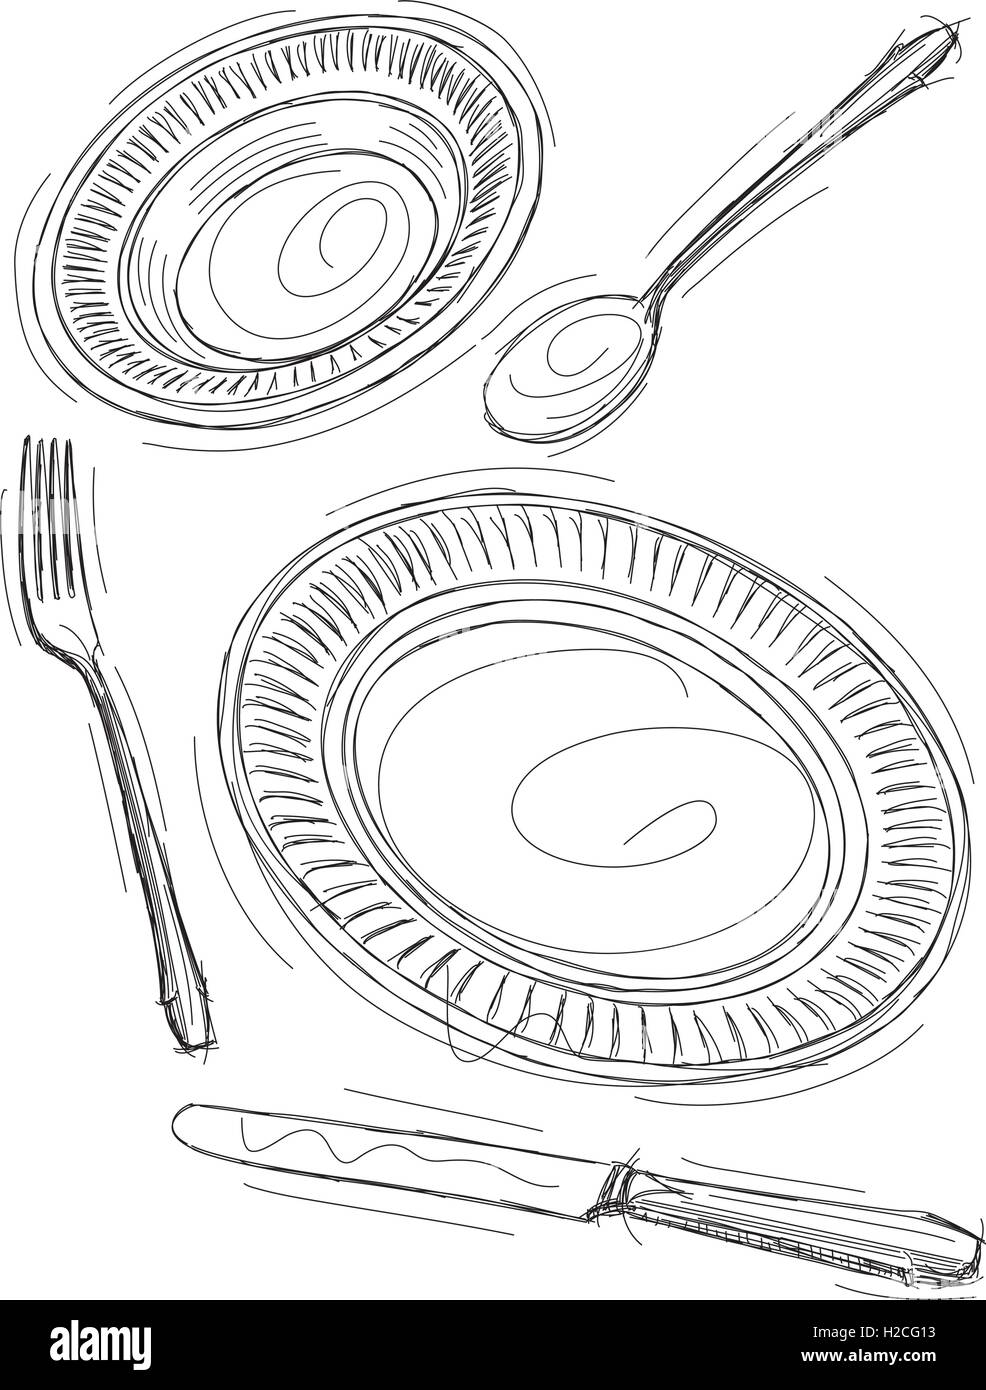 Graphic Sketch Clean Dishes. Piles of Plates Stock Illustration -  Illustration of house, detailed: 176518578